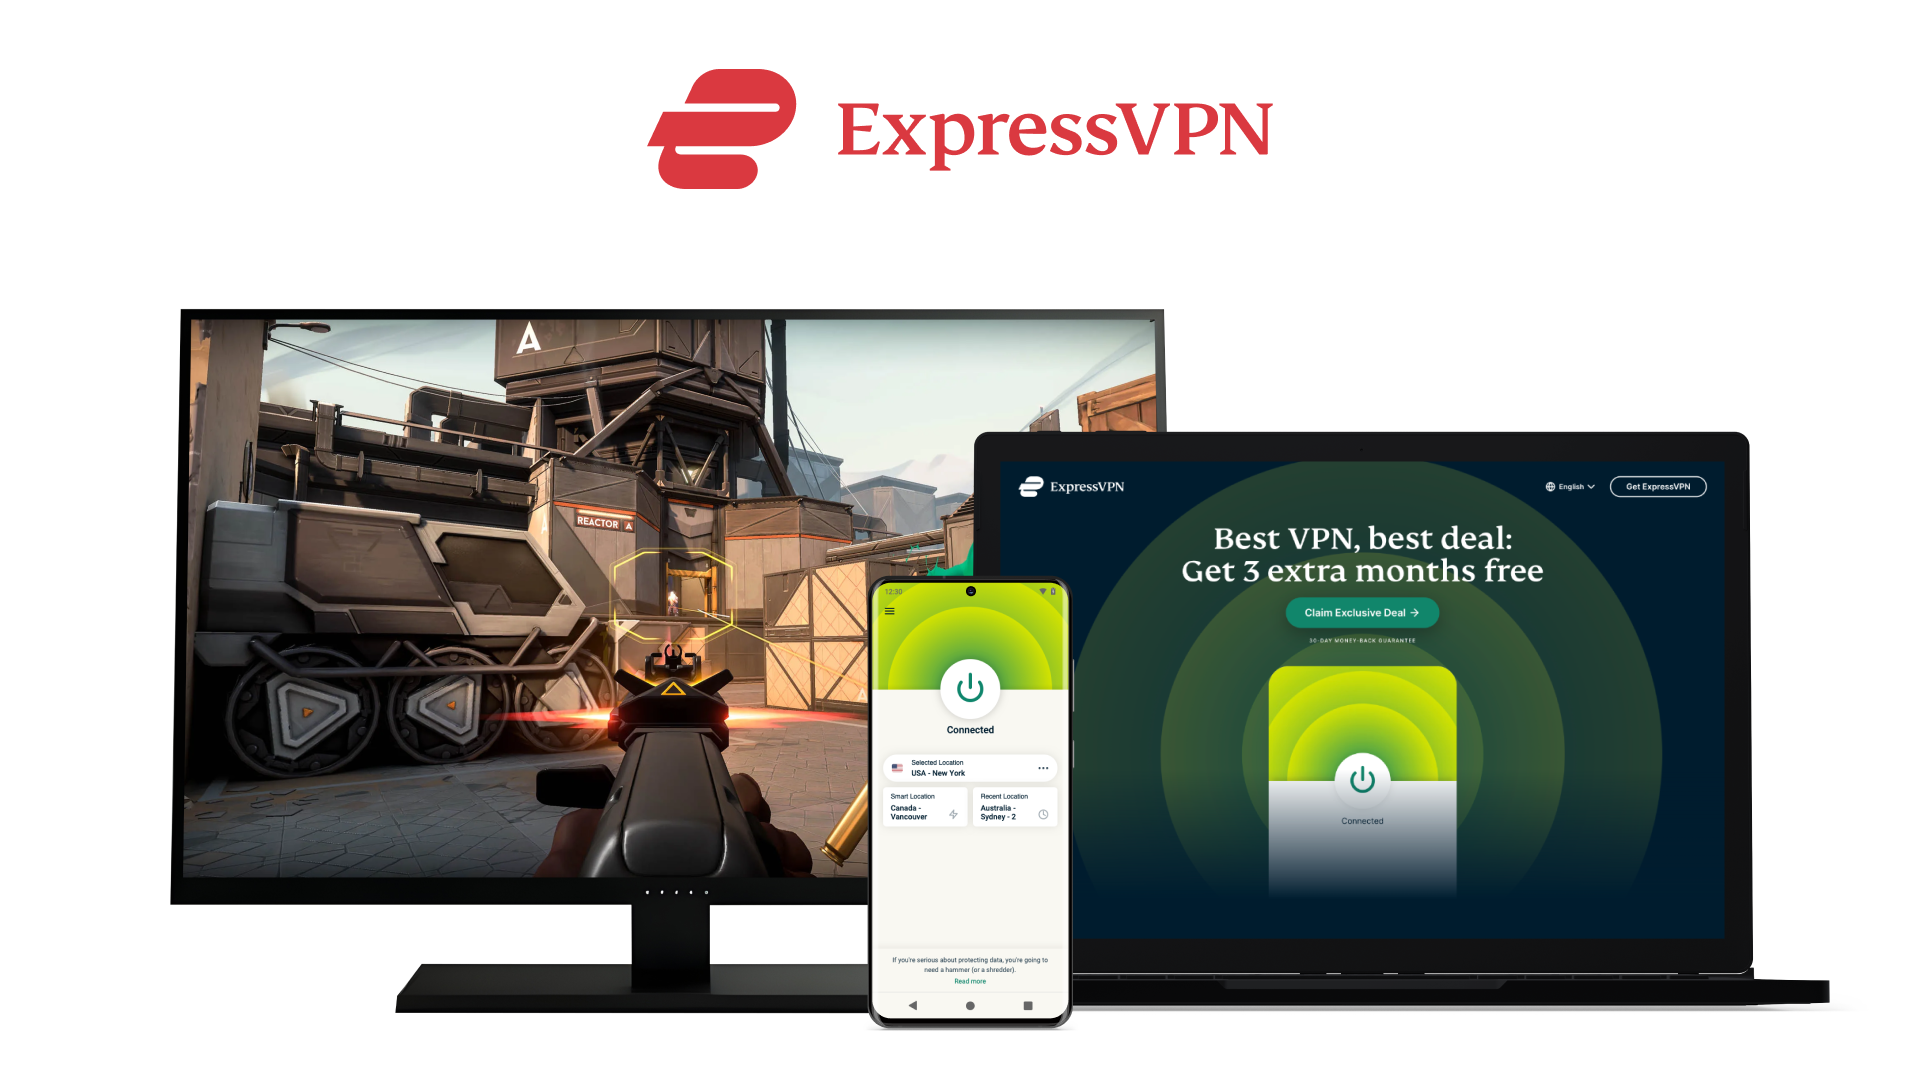 Can you get a free gaming VPN?